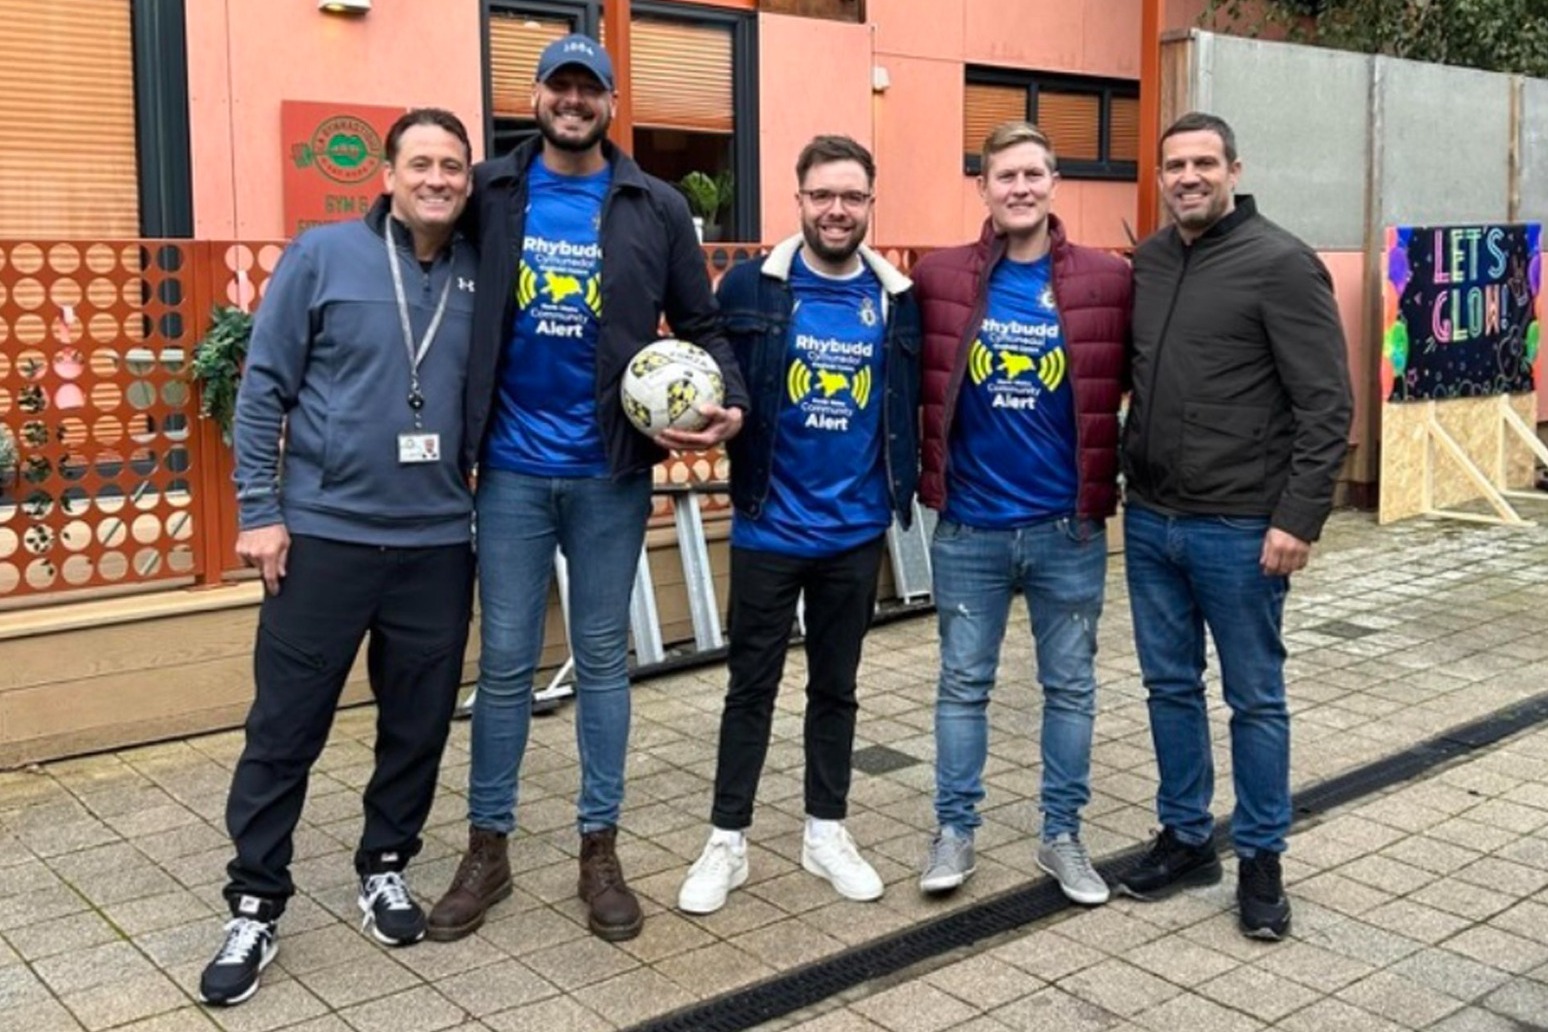 Welsh police officers take on Hollyoaks cast members in charity football match 